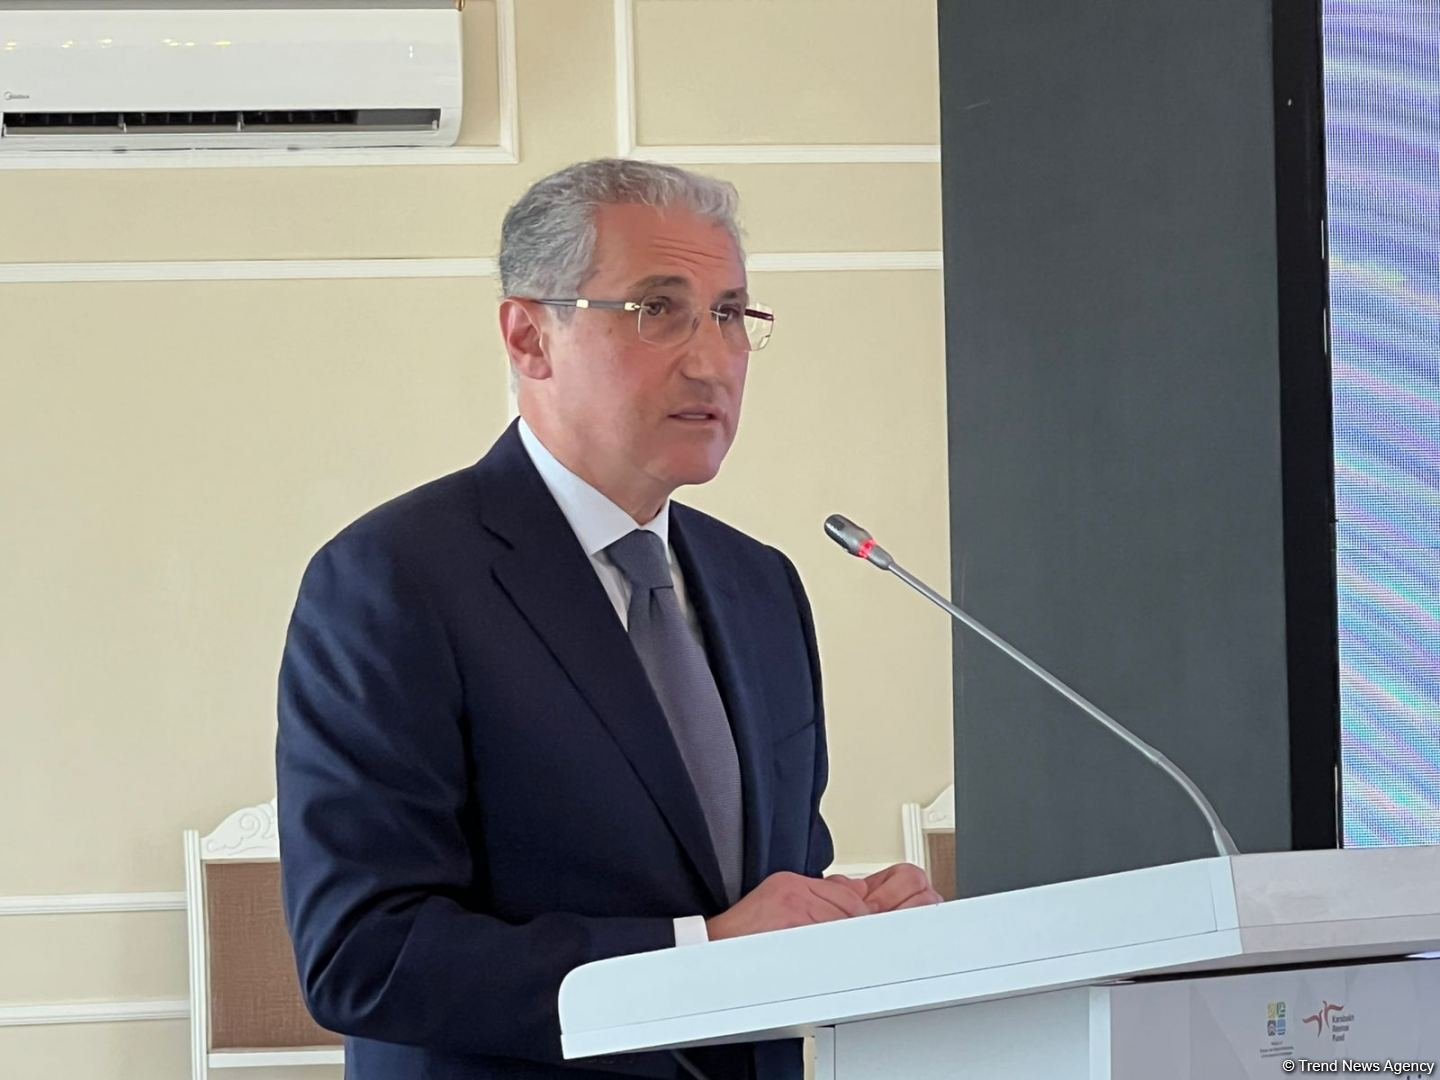 Assessment of damage caused to nature in Azerbaijan's liberated territories ongoing - minister